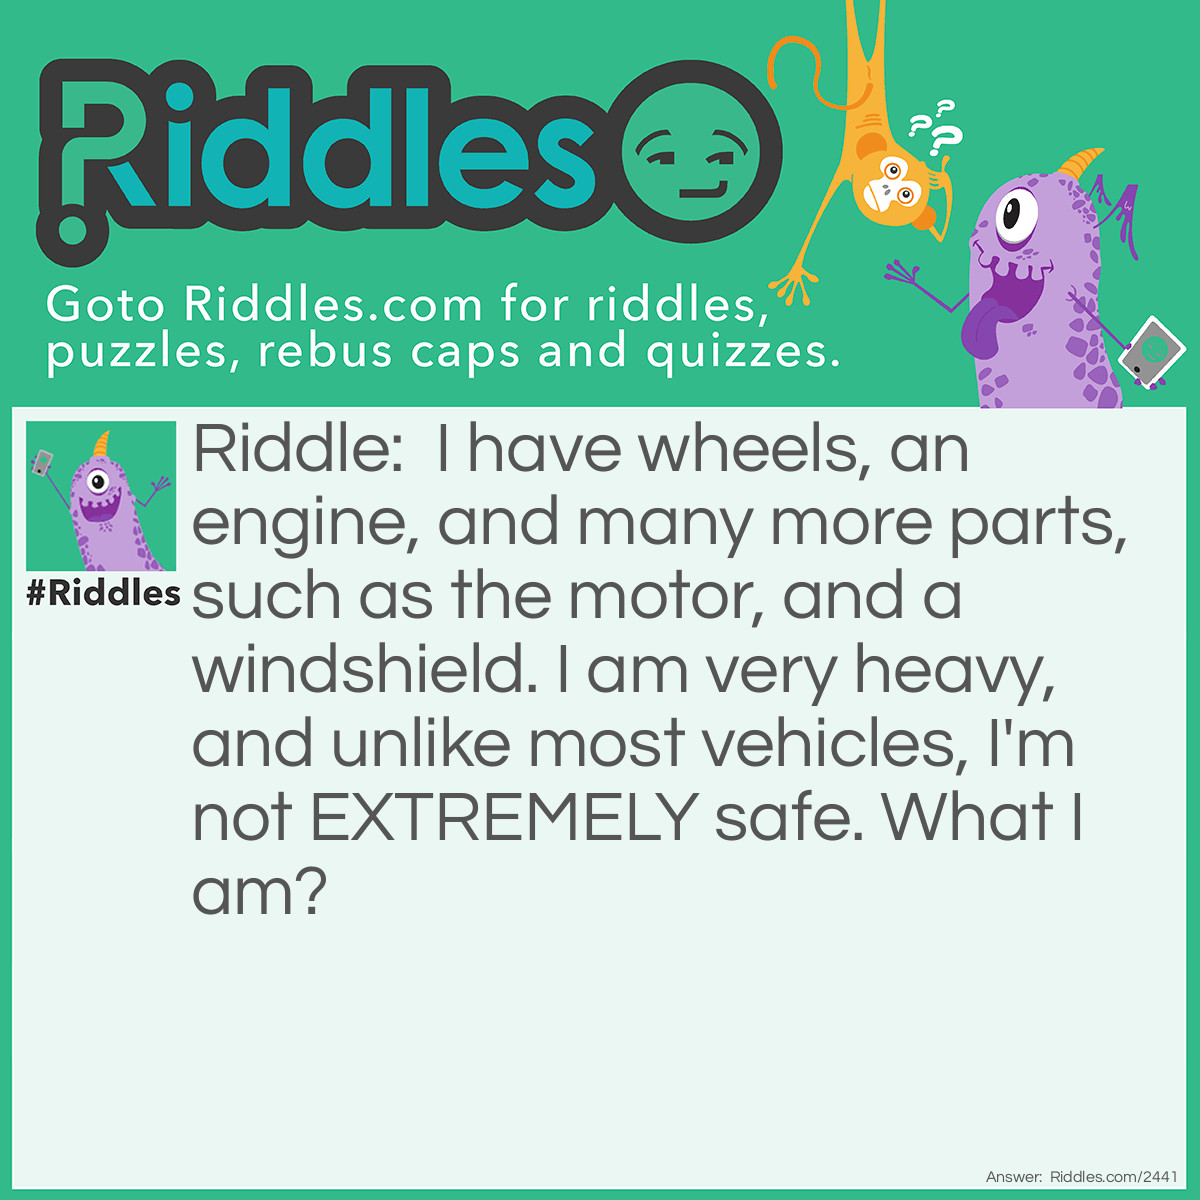 Riddle: I have wheels, an engine, and many more parts, such as the motor, and a windshield. I am very heavy, and unlike most vehicles, I'm not EXTREMELY safe. What I am? Answer: A Motorcycle.